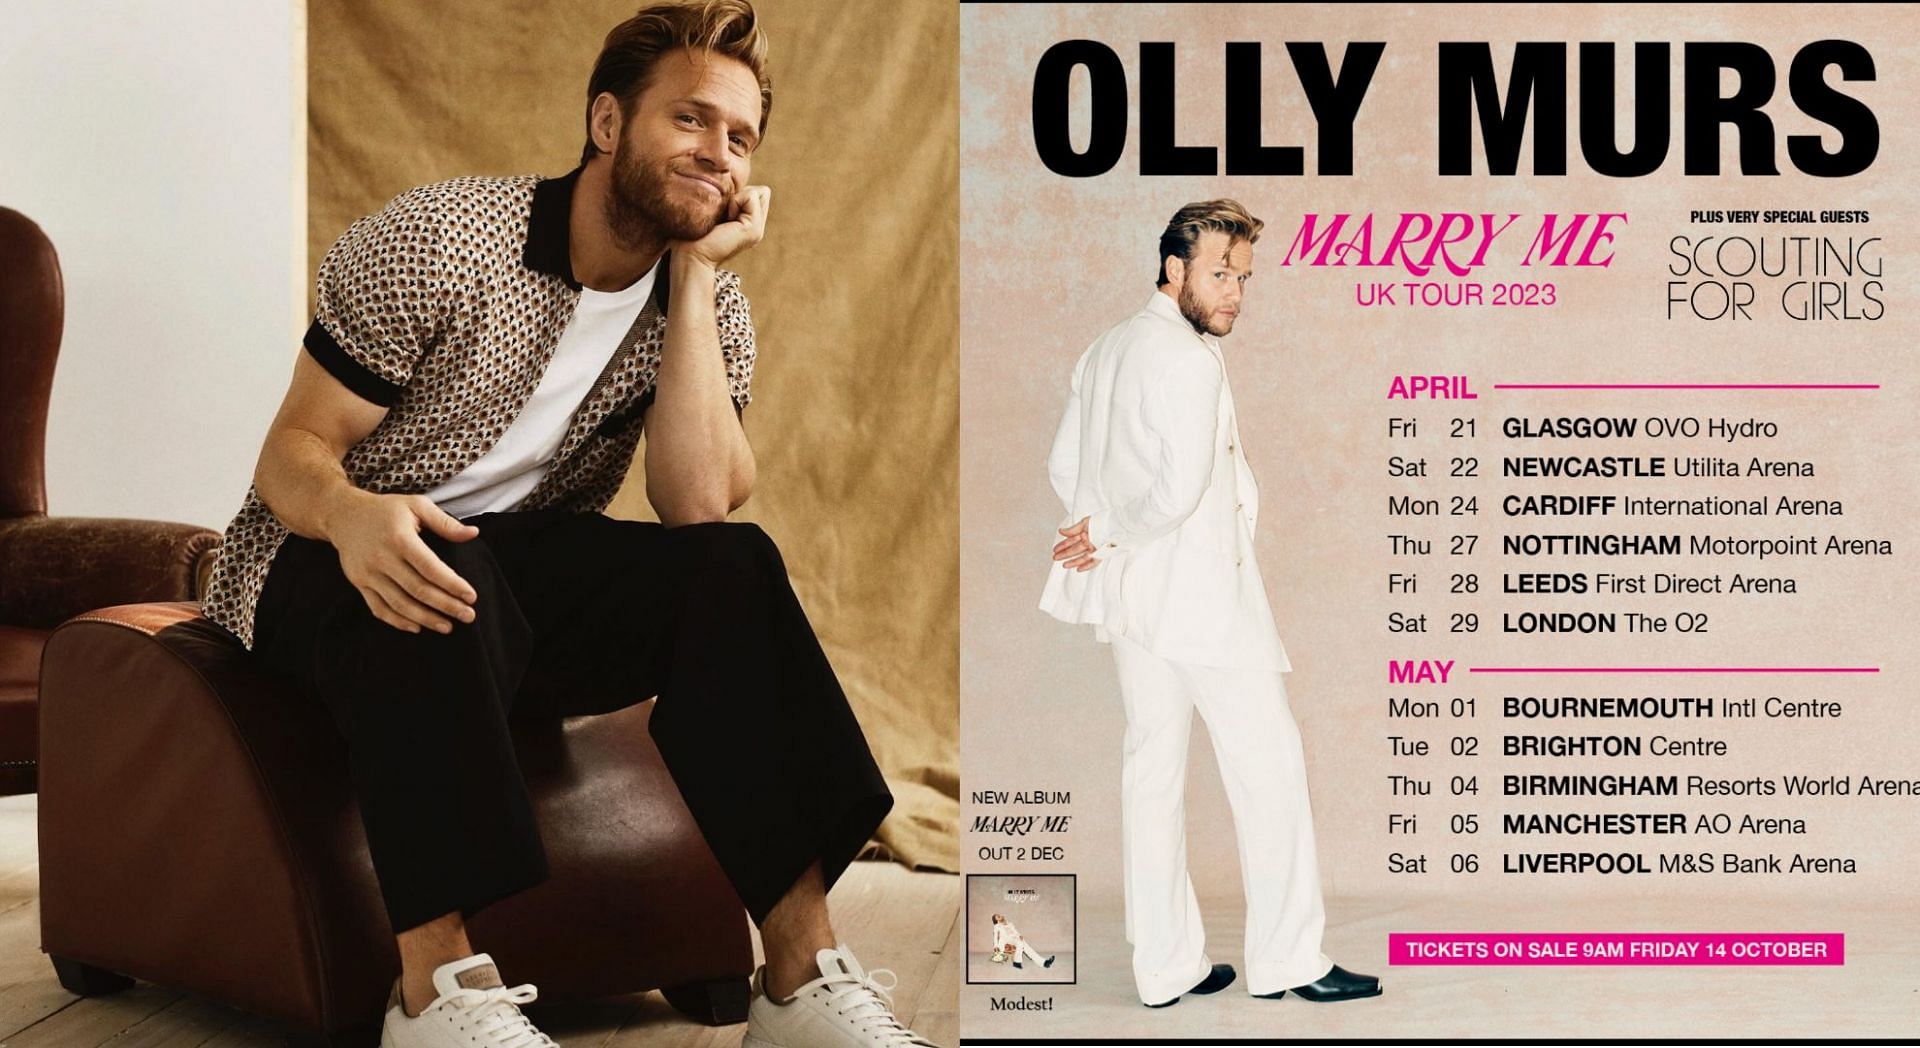 olly murs tour 2023 liverpool